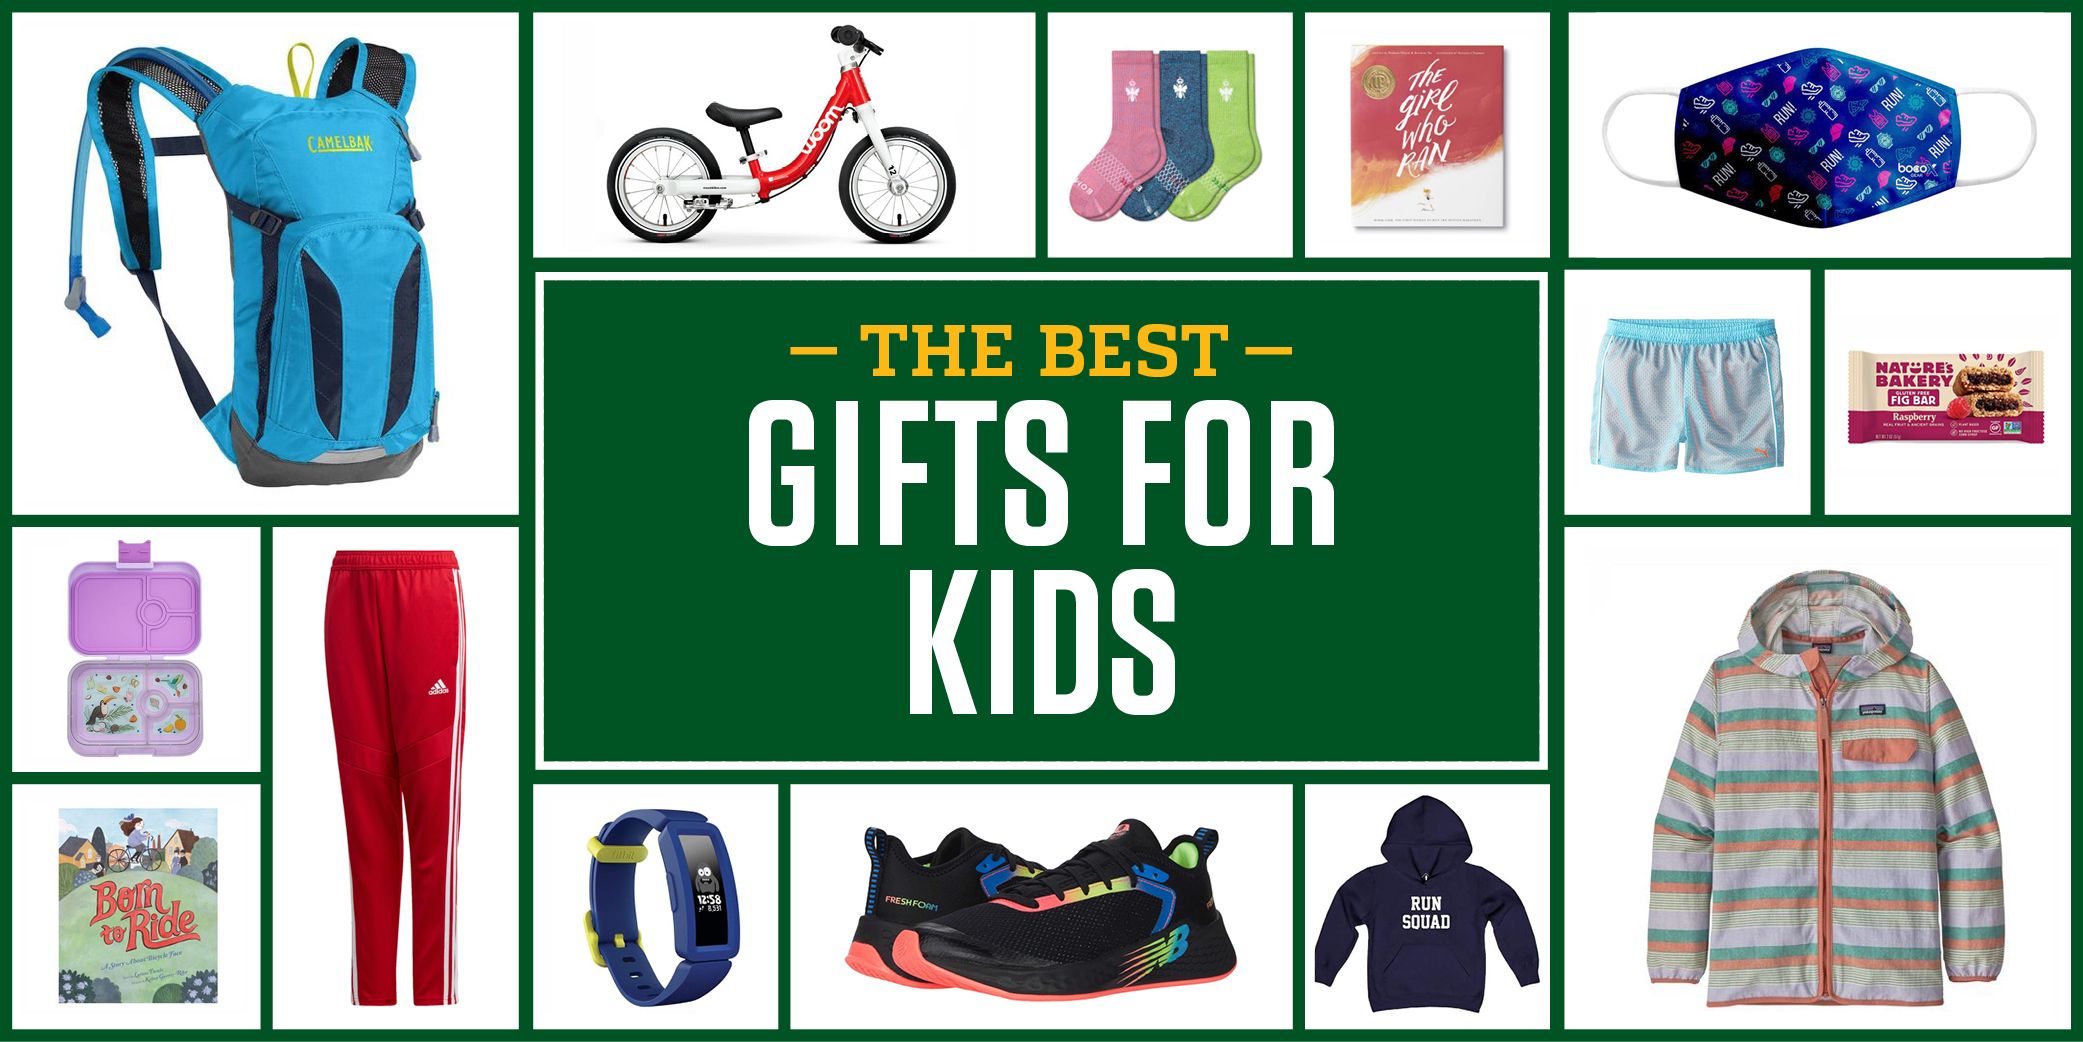 49 Amazon Gifts for Runners in 2022 - Best Running Products on Amazon